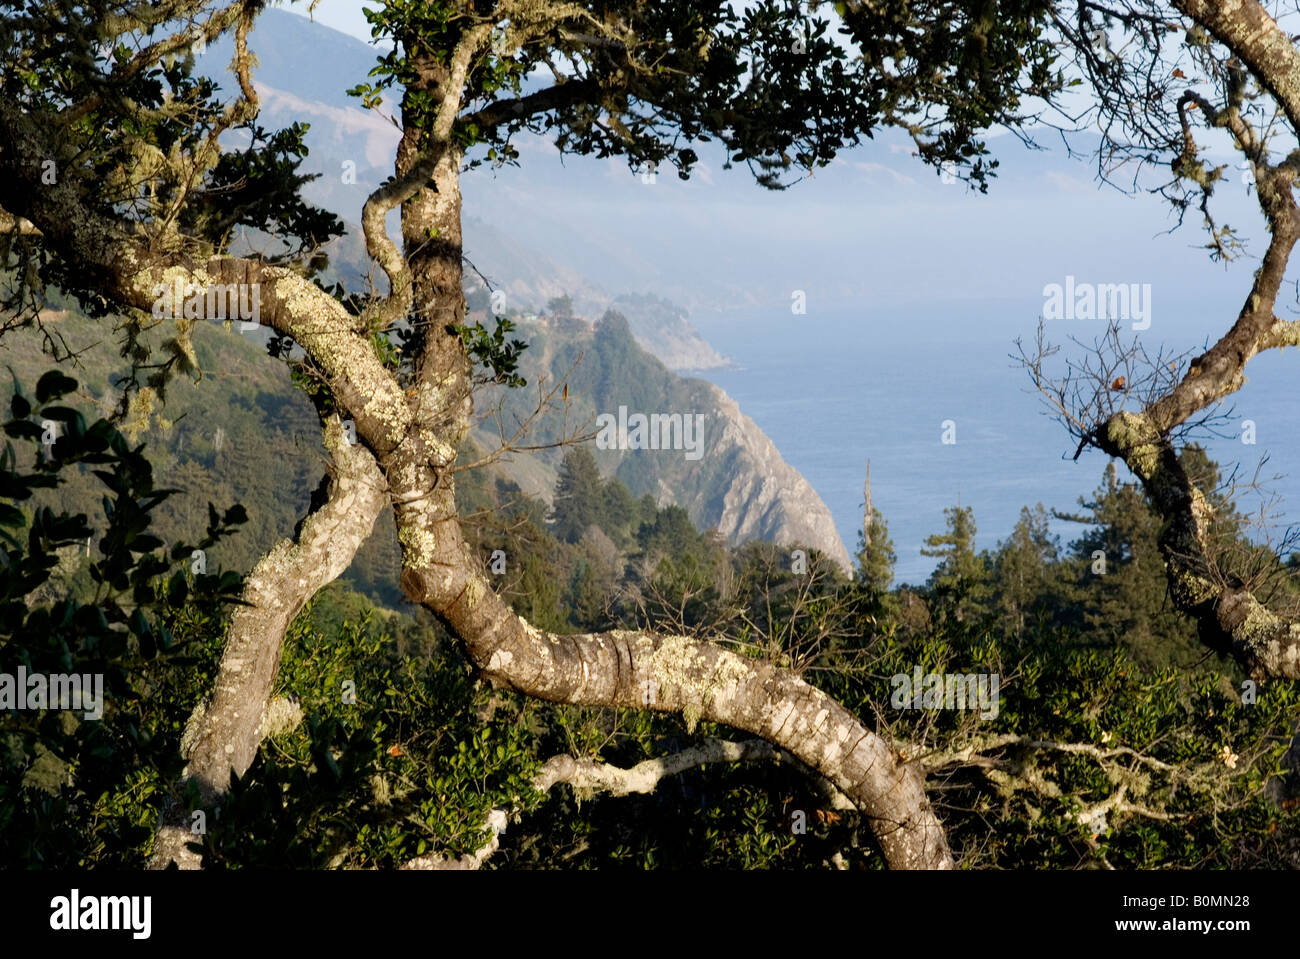 View of Big Sur coastline from Nepenthe restaurant, central California, USA Stock Photo